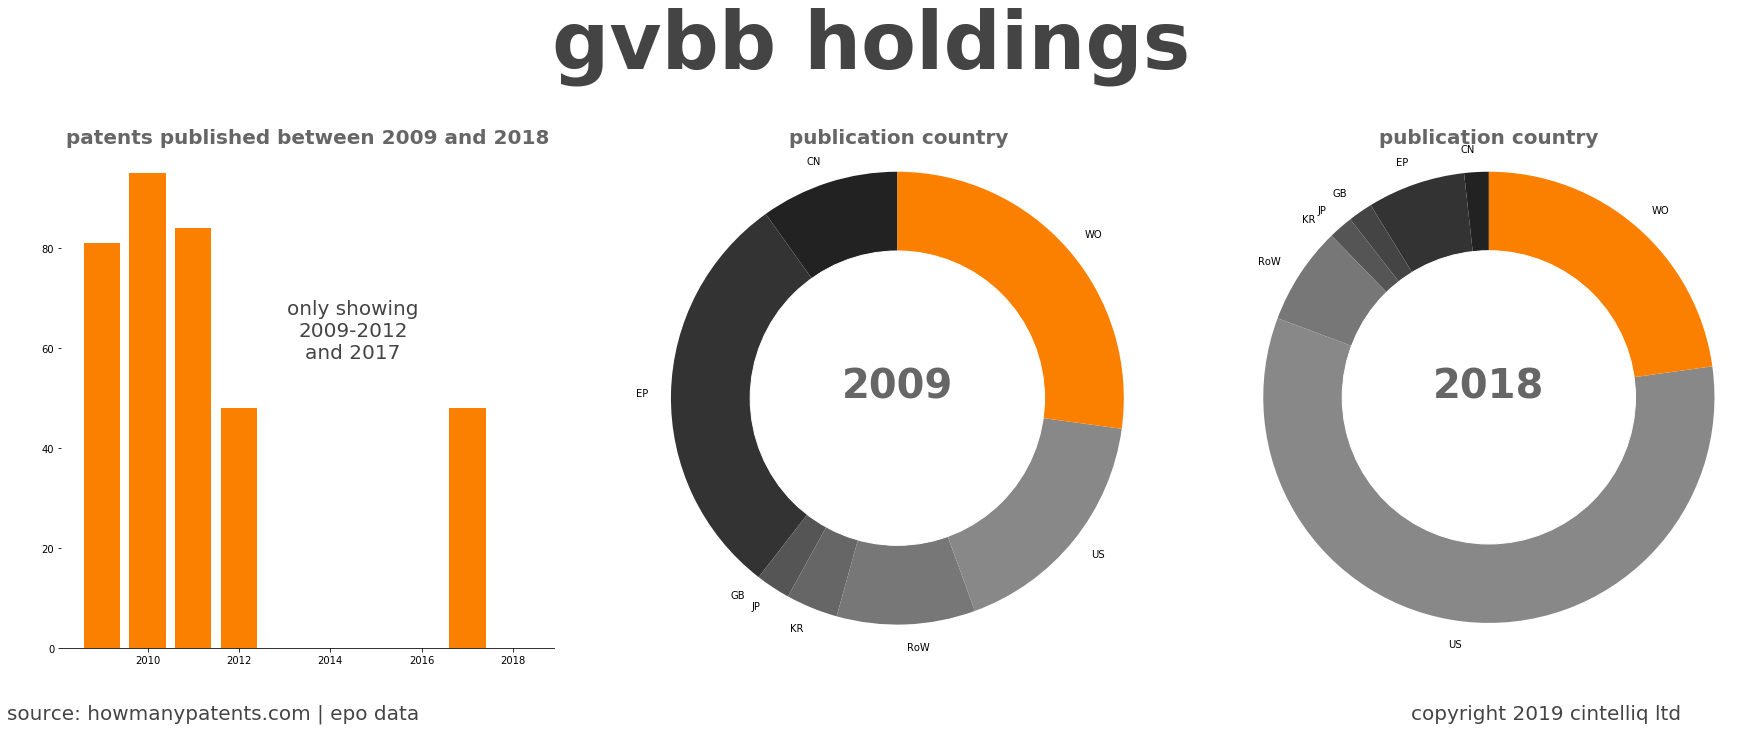 summary of patents for Gvbb Holdings